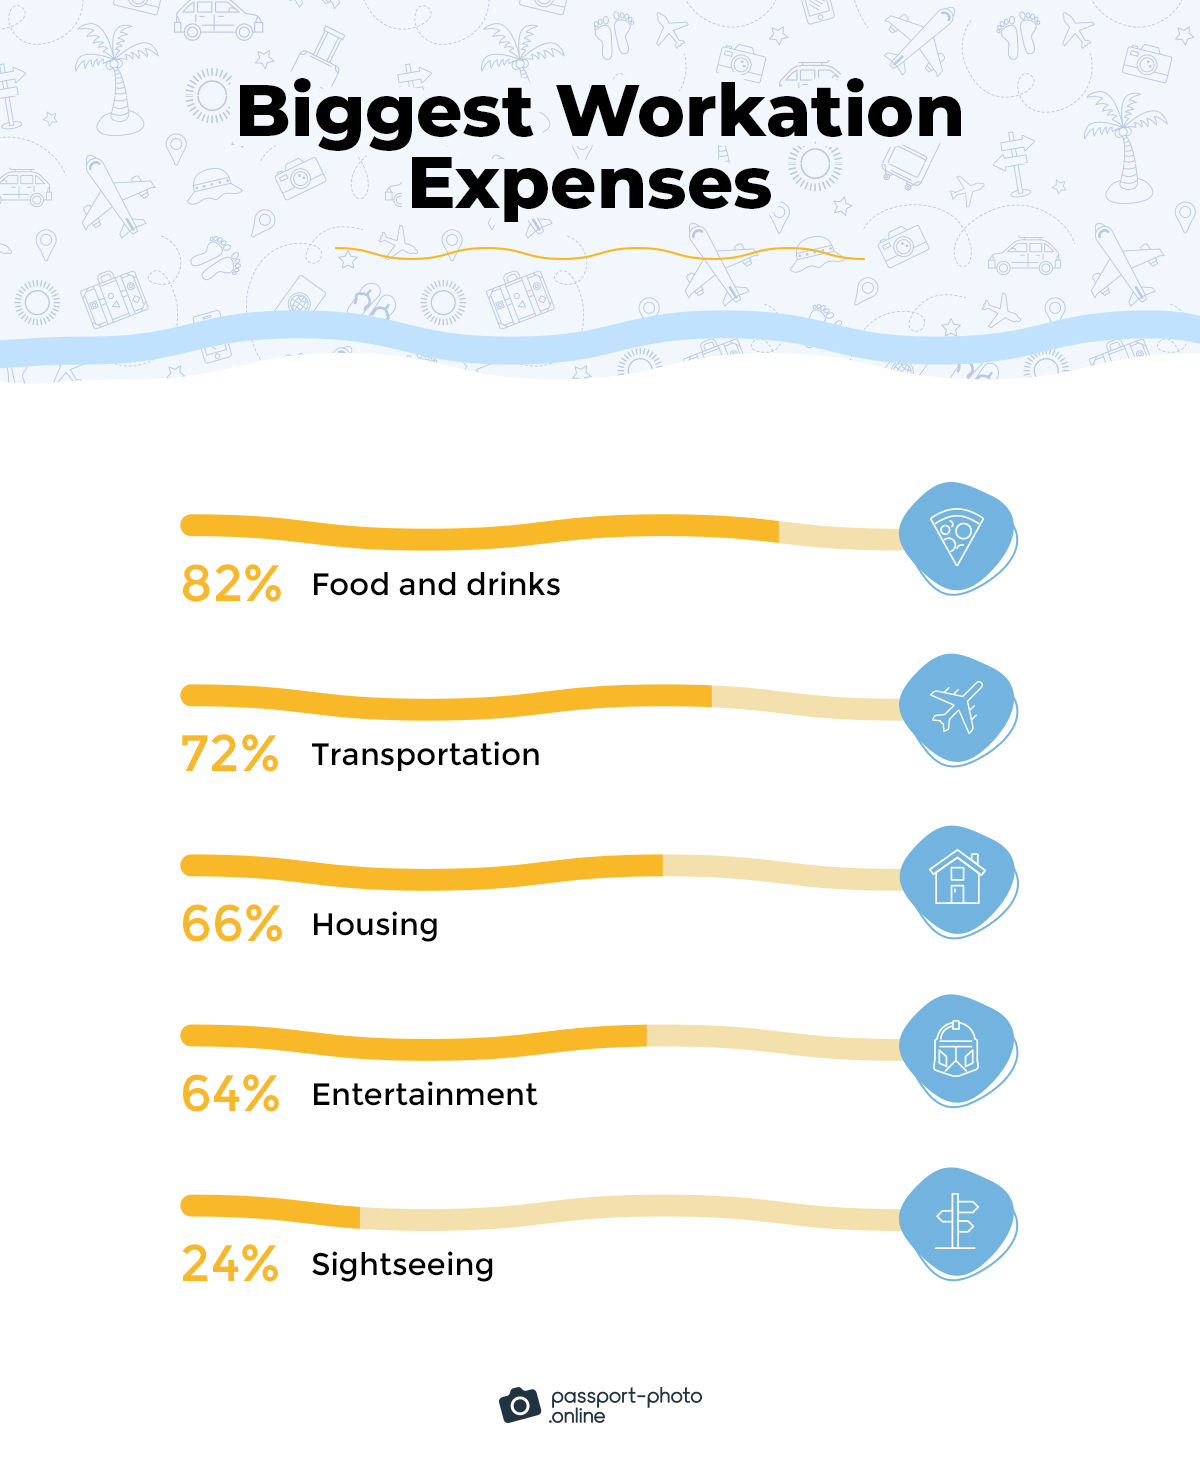 americans' biggest workation expenses